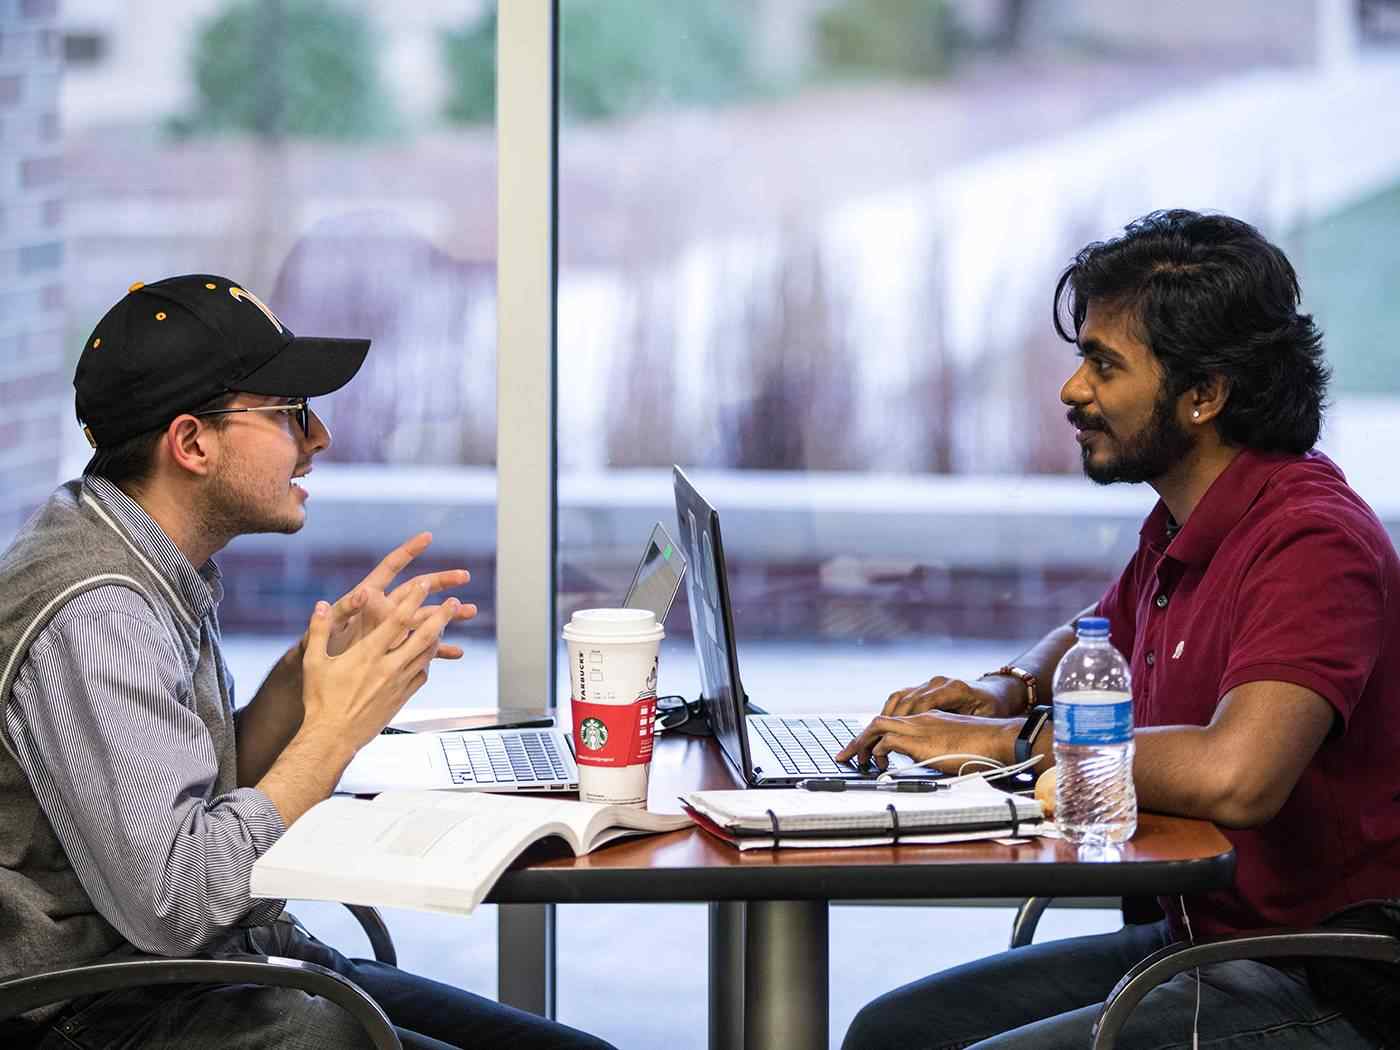 Two communications students at opposite ends of a table have have a lively conversation over their open laptop computers. 